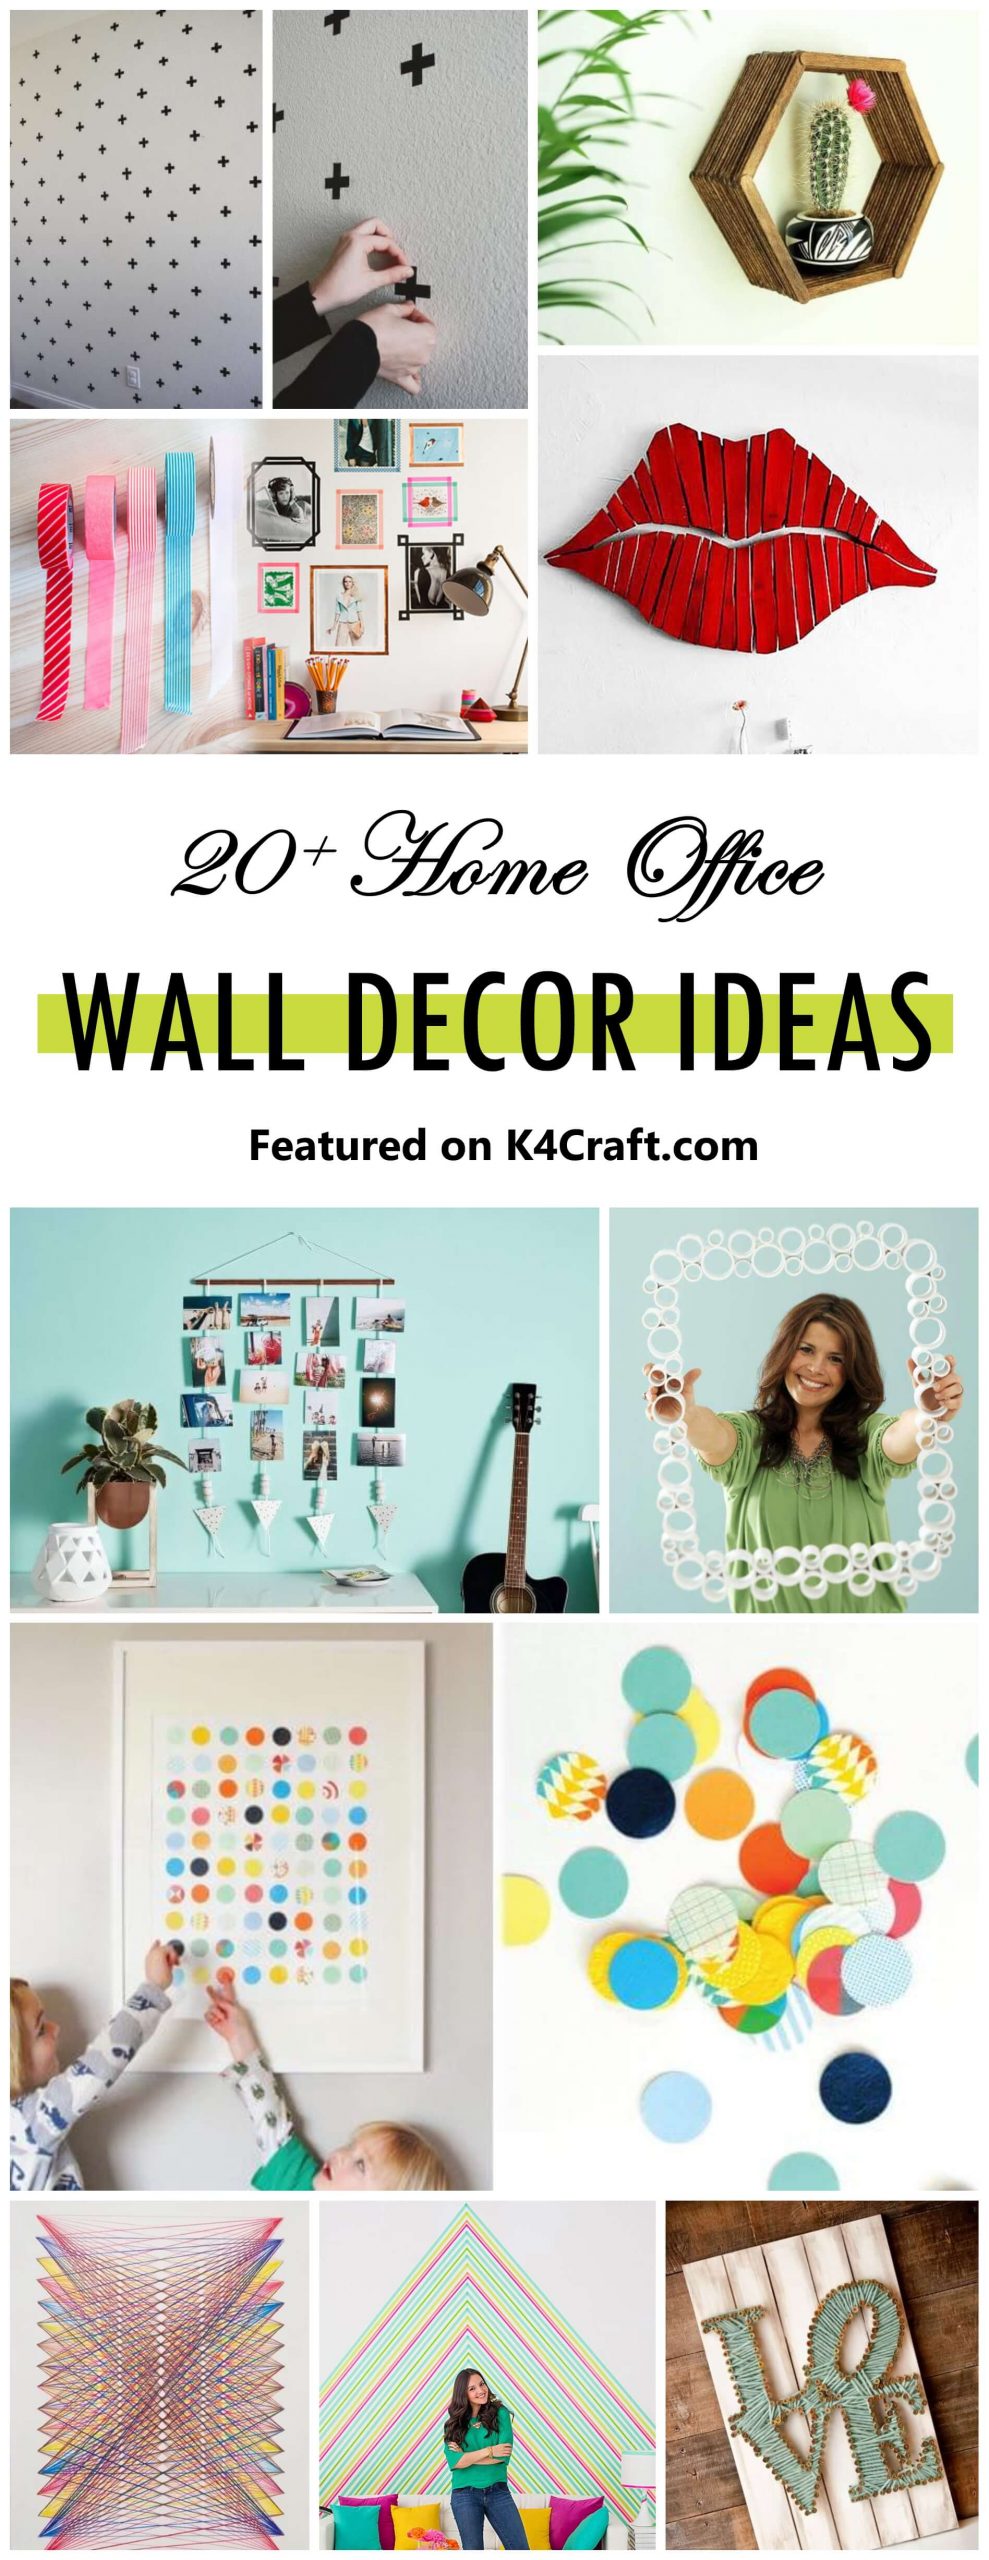 Funky Handmade Home Decor Ideas To Try Out Now! Take A Look